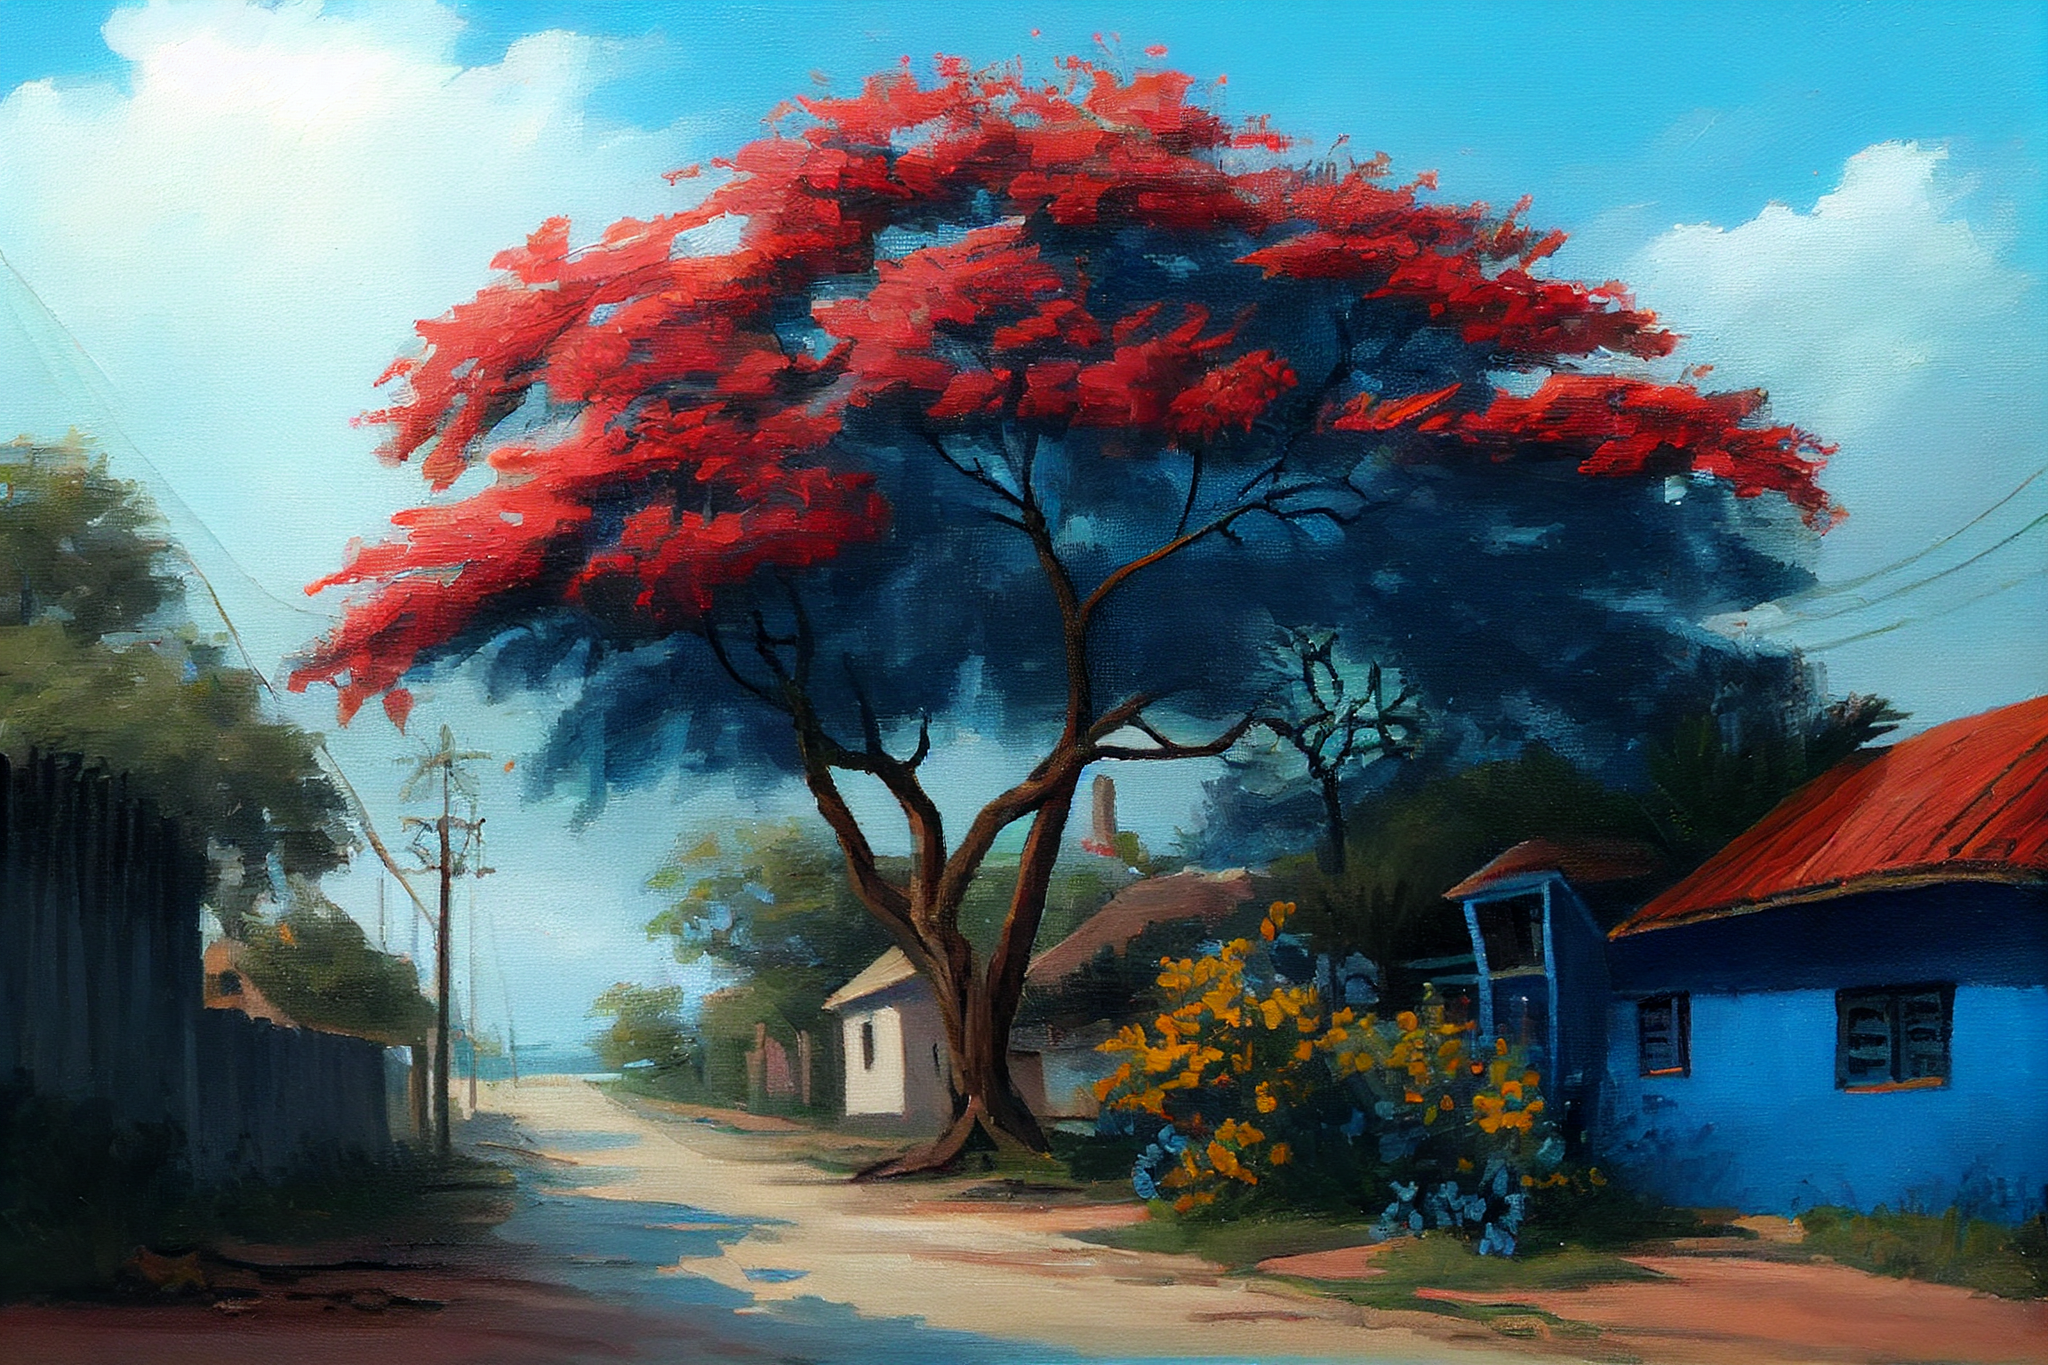 Vibrant Blooms: A Stunning Oil Painting Print of a Gulmohar Tree in an Indian Village